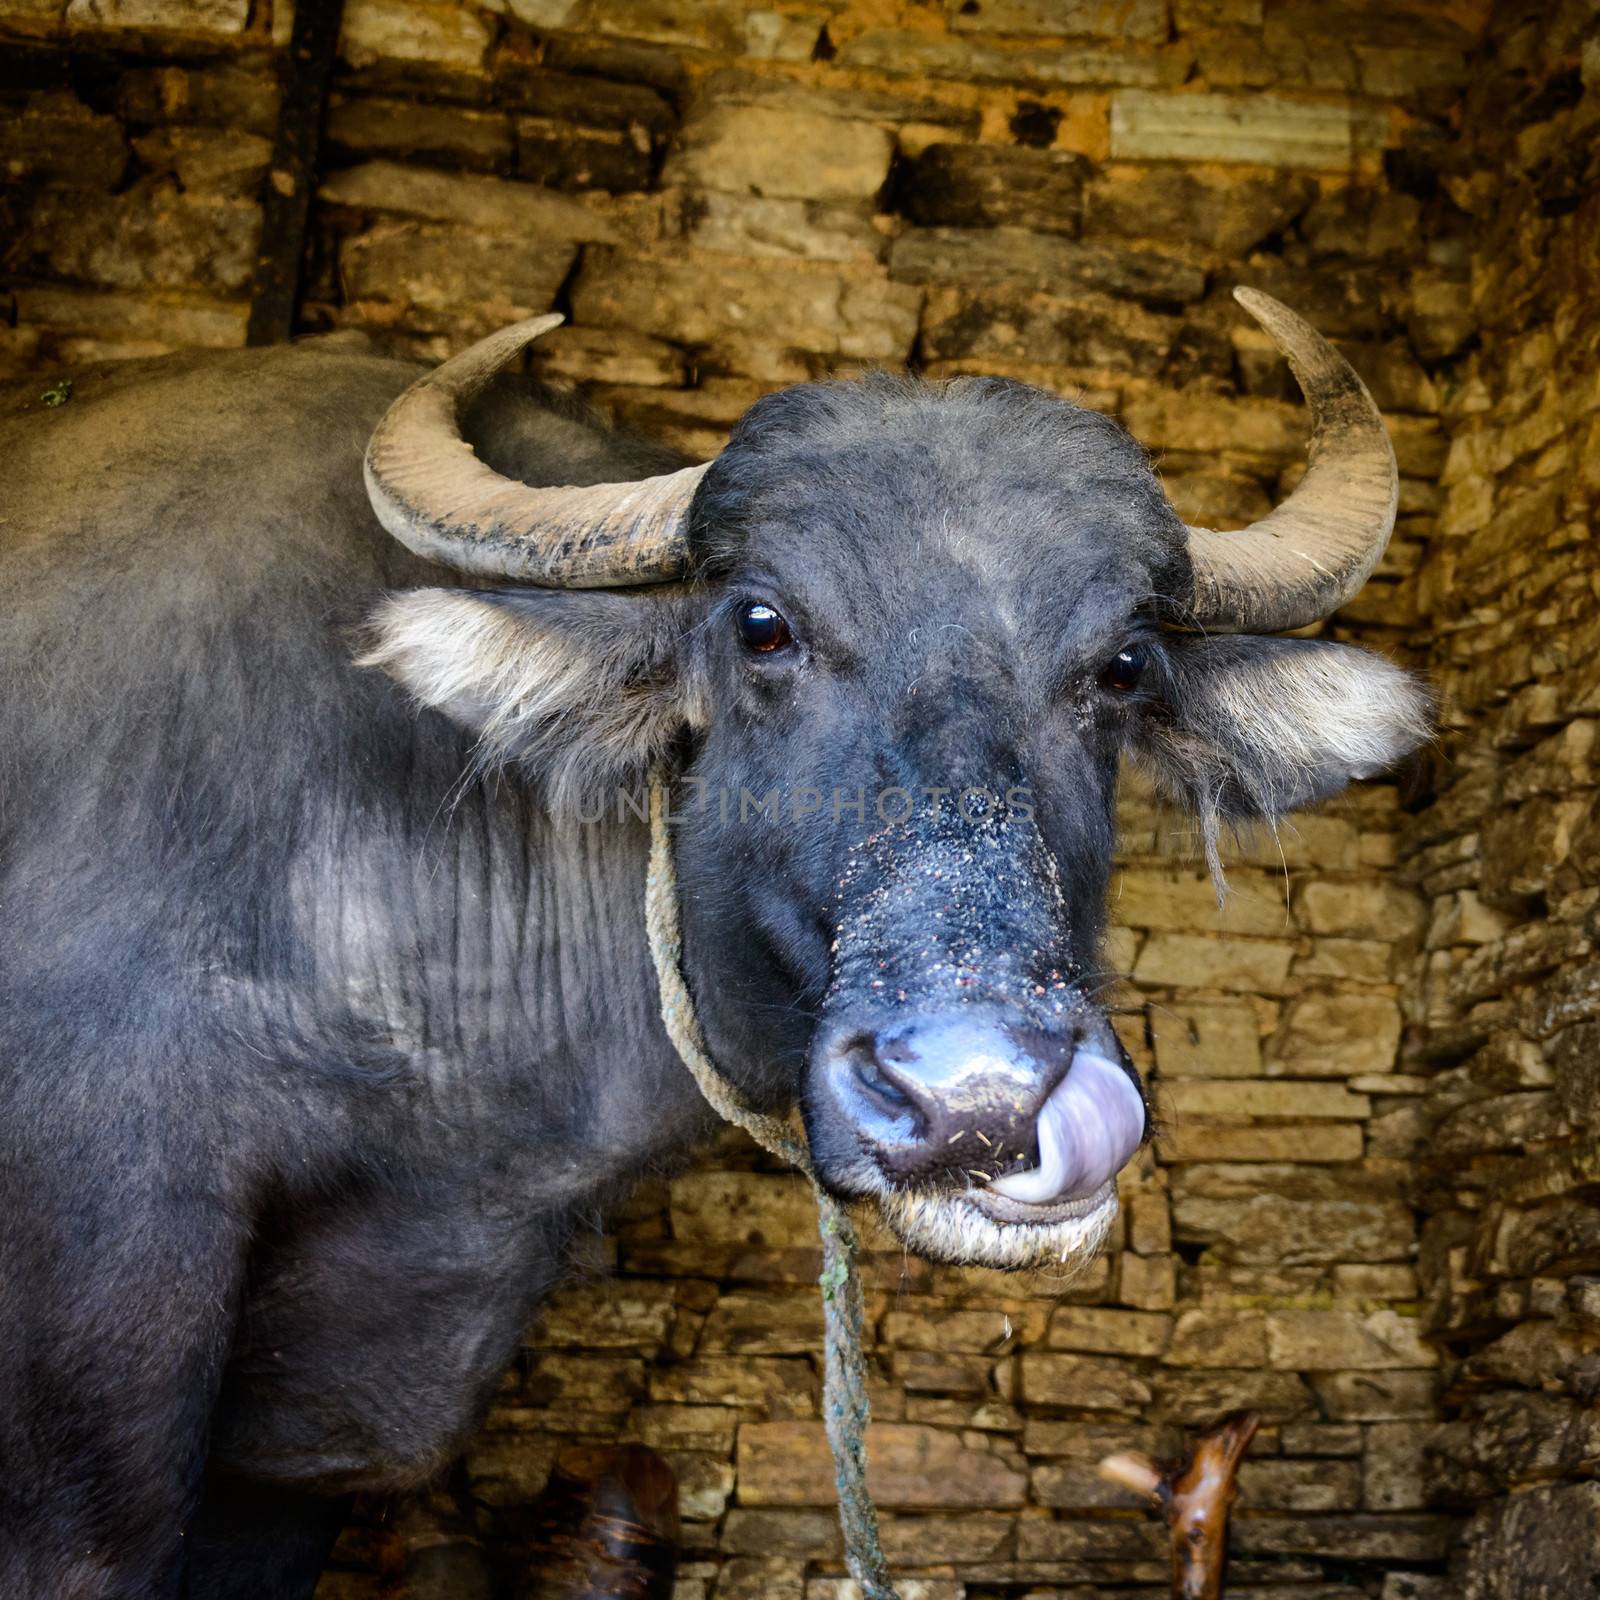 Nepalese buffalo licking its own nose